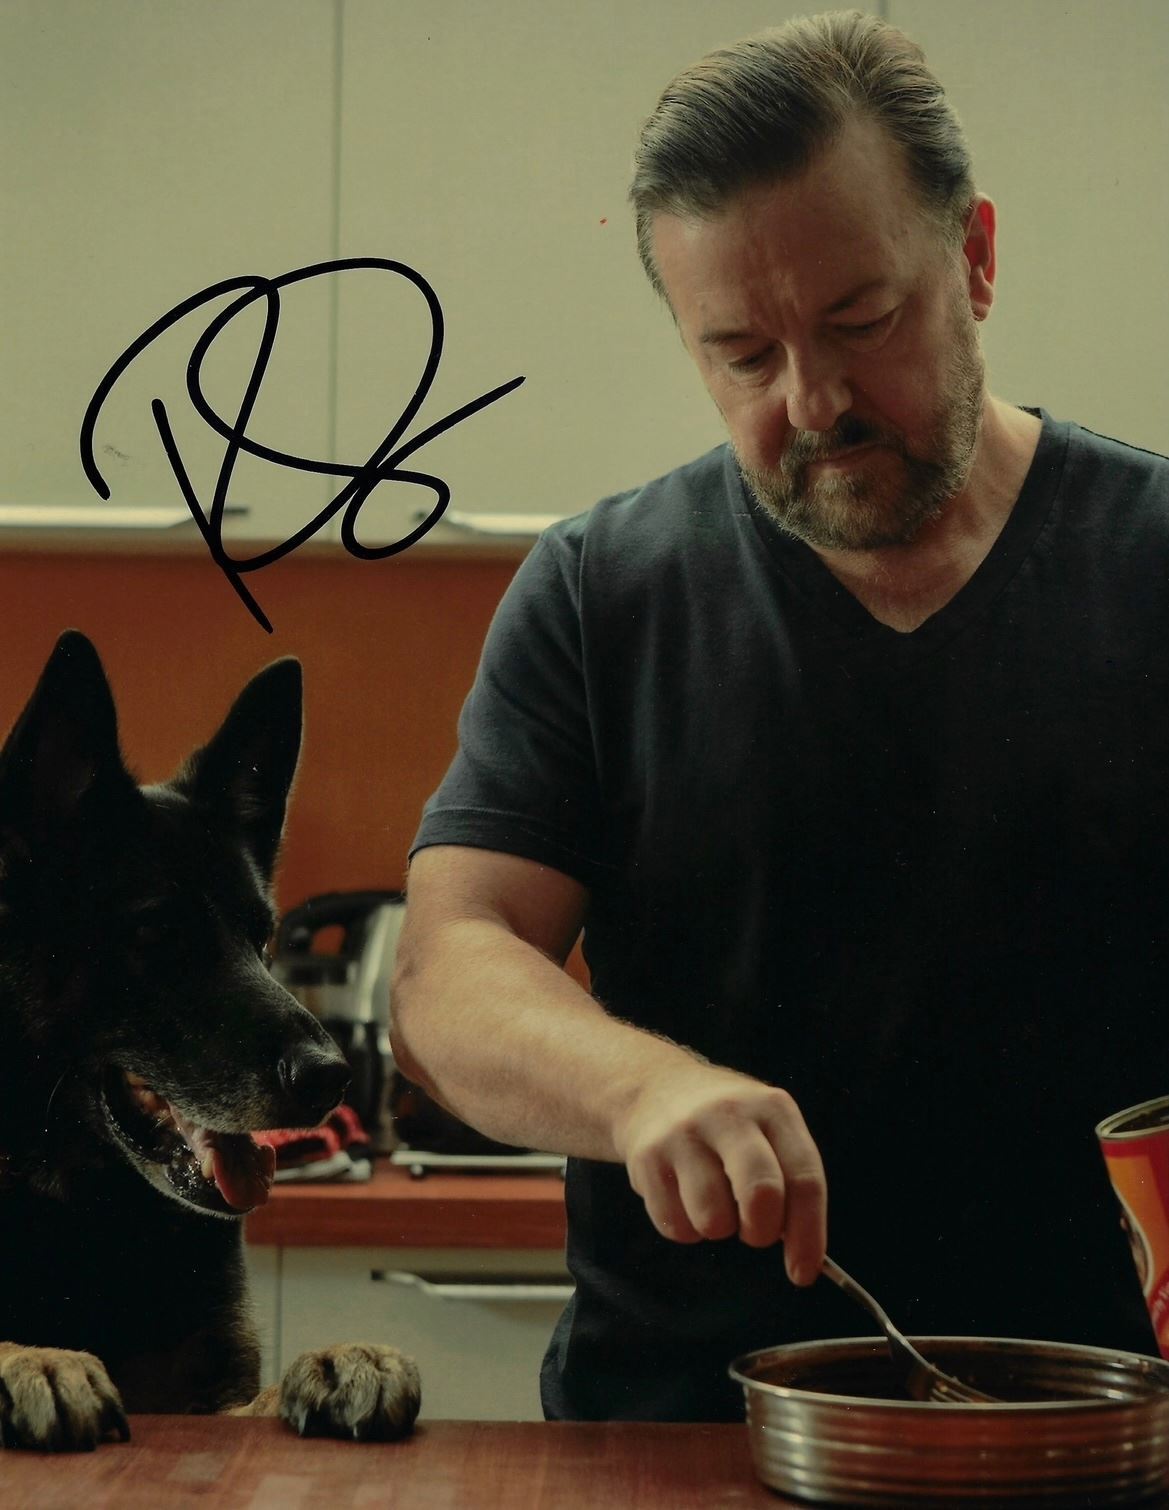 RICKY GERVAIS SIGNED AFTER LIFE 12x8 PHOTOGRAPH 2 (AFTAL COA)